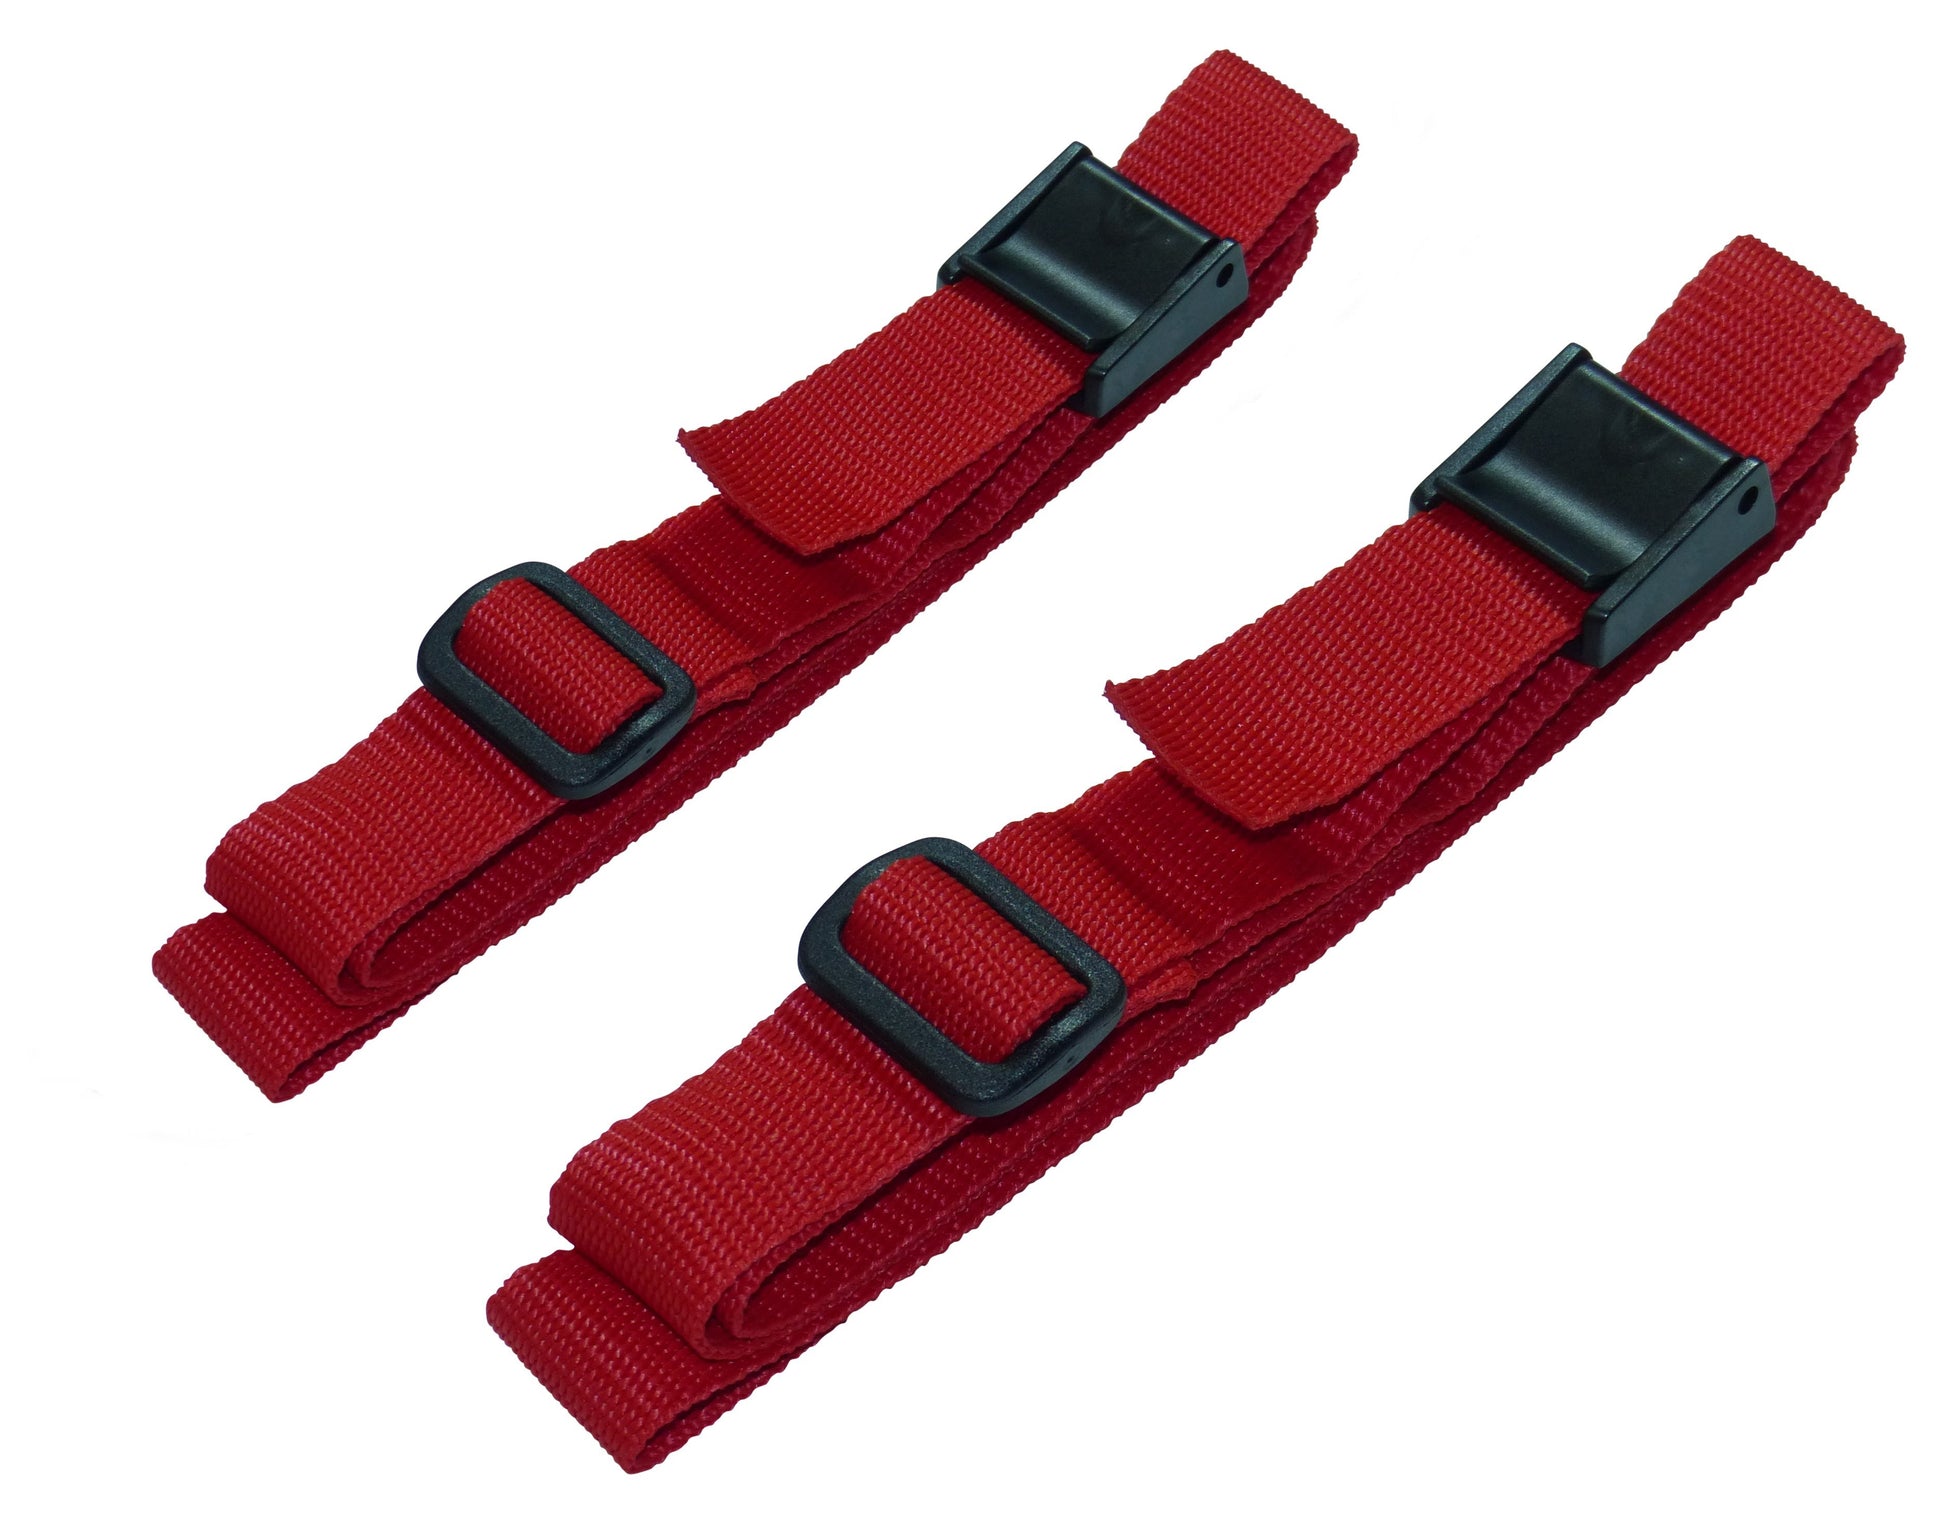 25mm Rivetted Strap with Plastic Cam Buckle & Triglide Buckles (Pair) in red